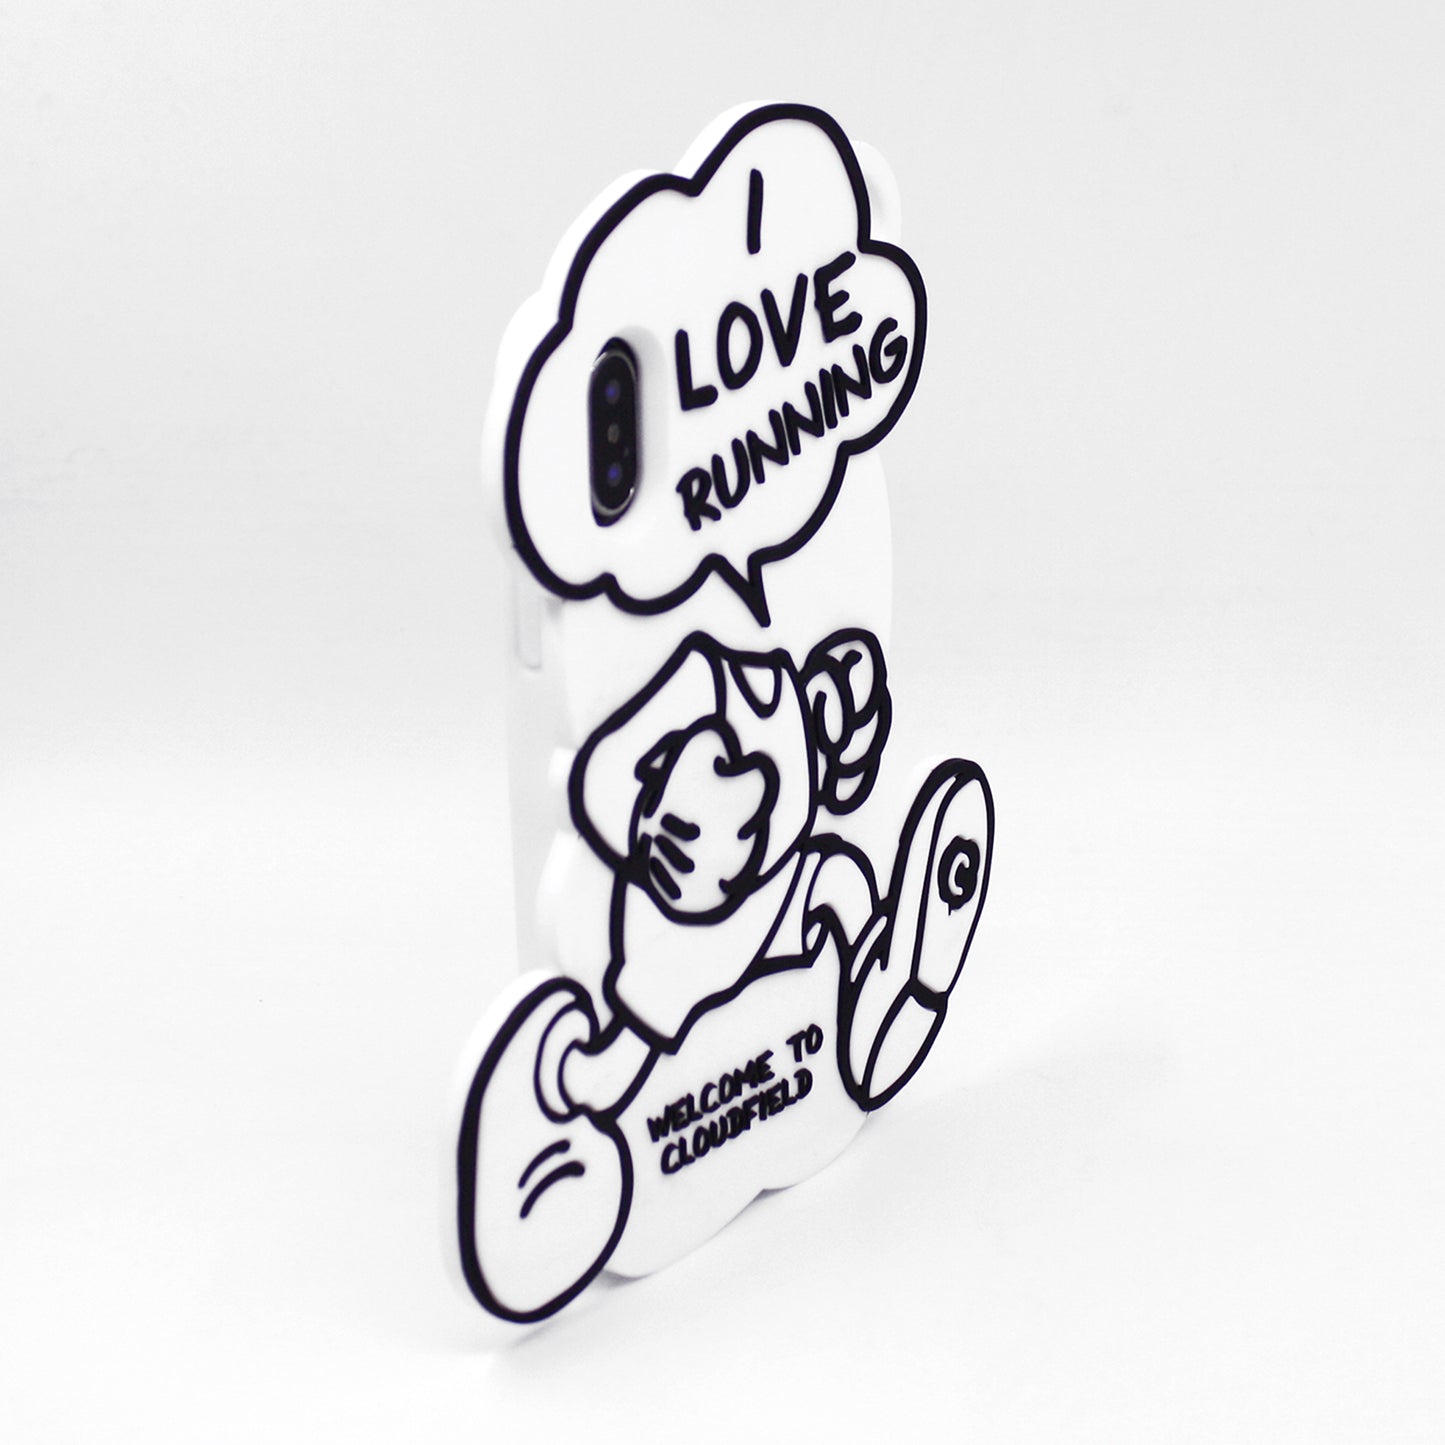 Candies x Cloudfield iPhone X/XS Case - I Love Running